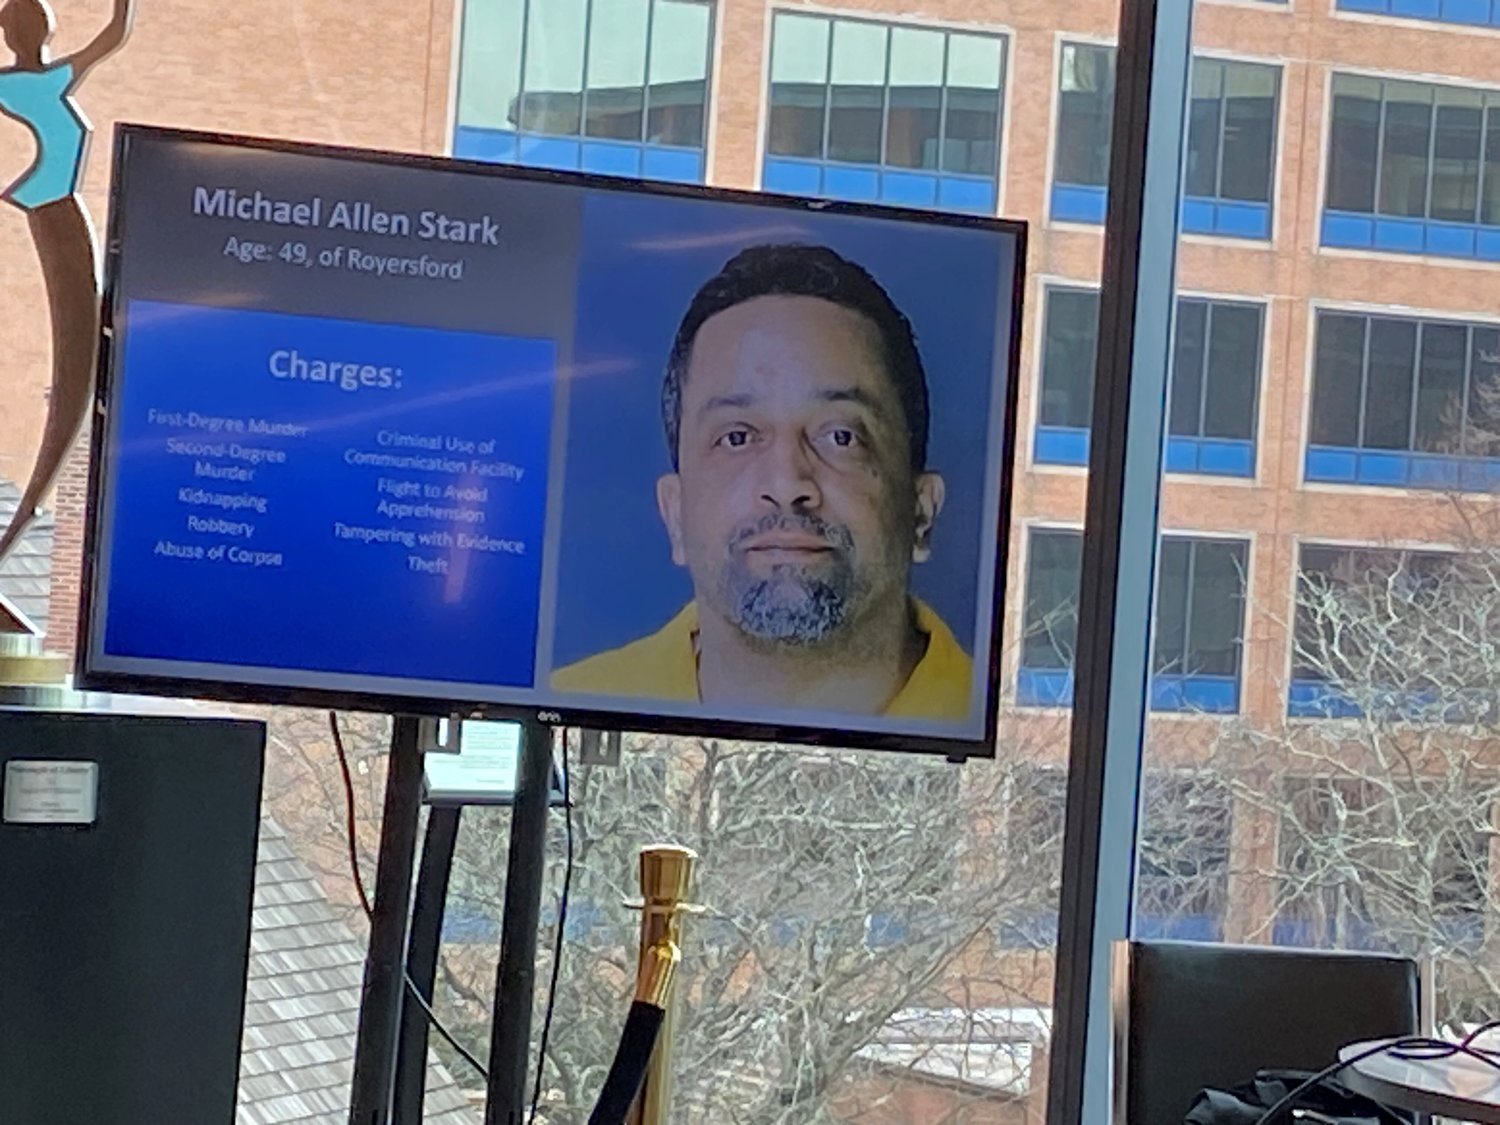 A monitor on the fourth floor of the Bucks County Justice Center displays a photograph of Michael Allen Stark  49, of Royersford, Montgomery County and a list of the charges filed against him. A grand jury has recommended kidnapping and murder charges against Stark in the disappearance and death of Matthew James Branning.